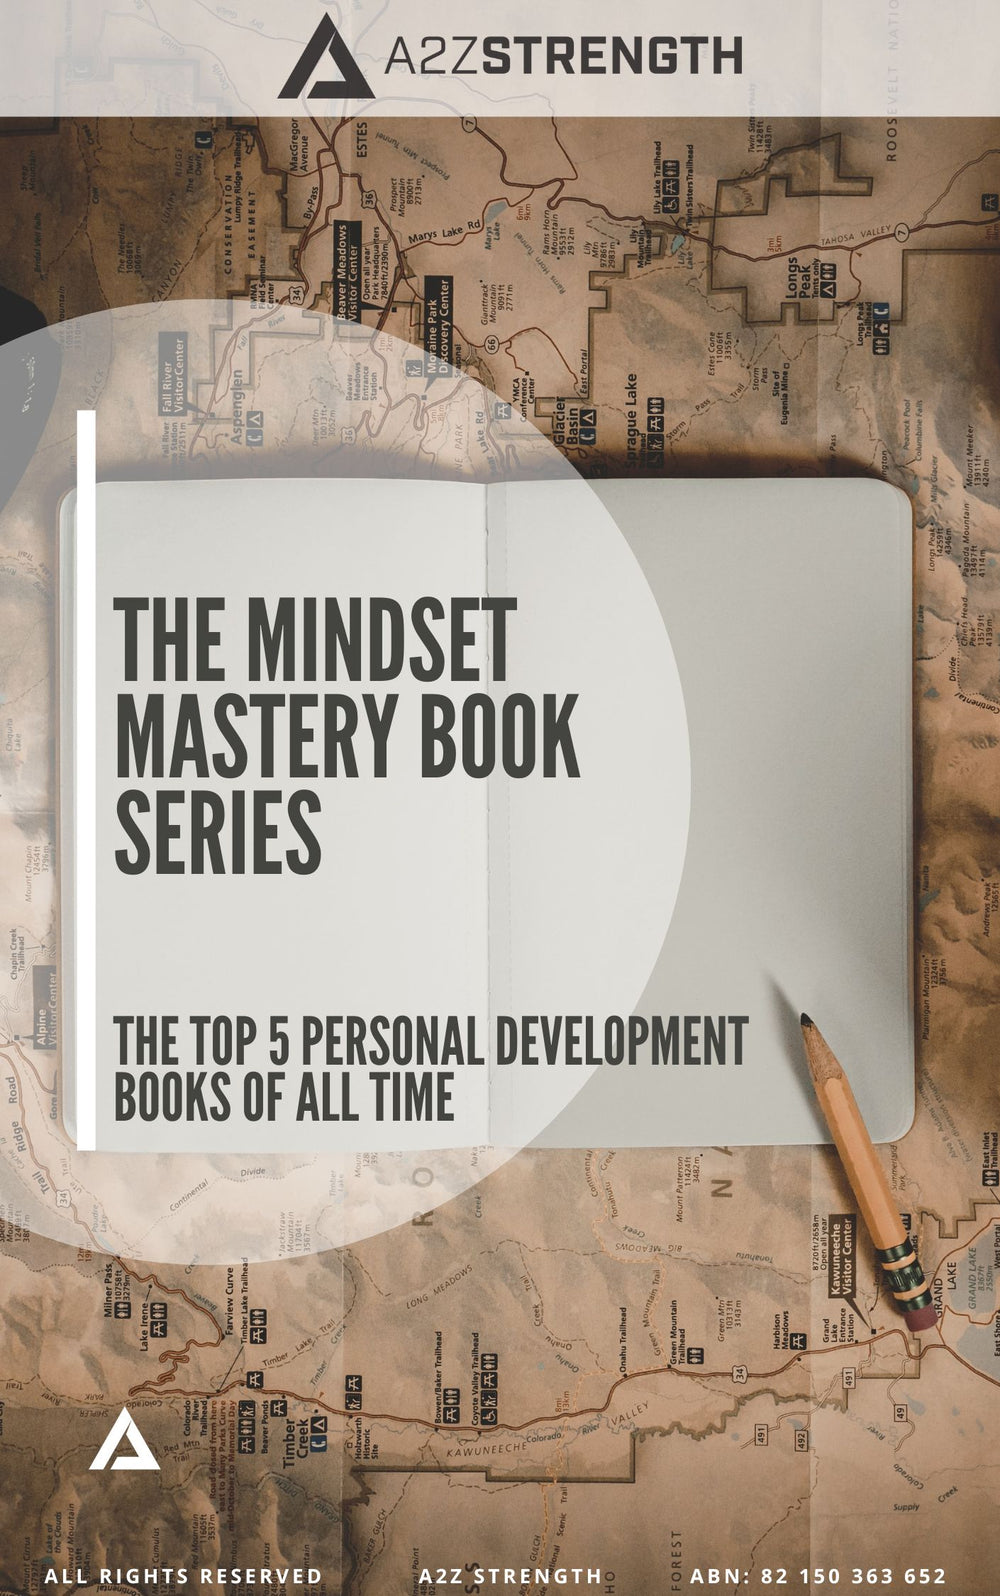 THE MINDSET MASTERY SERIES